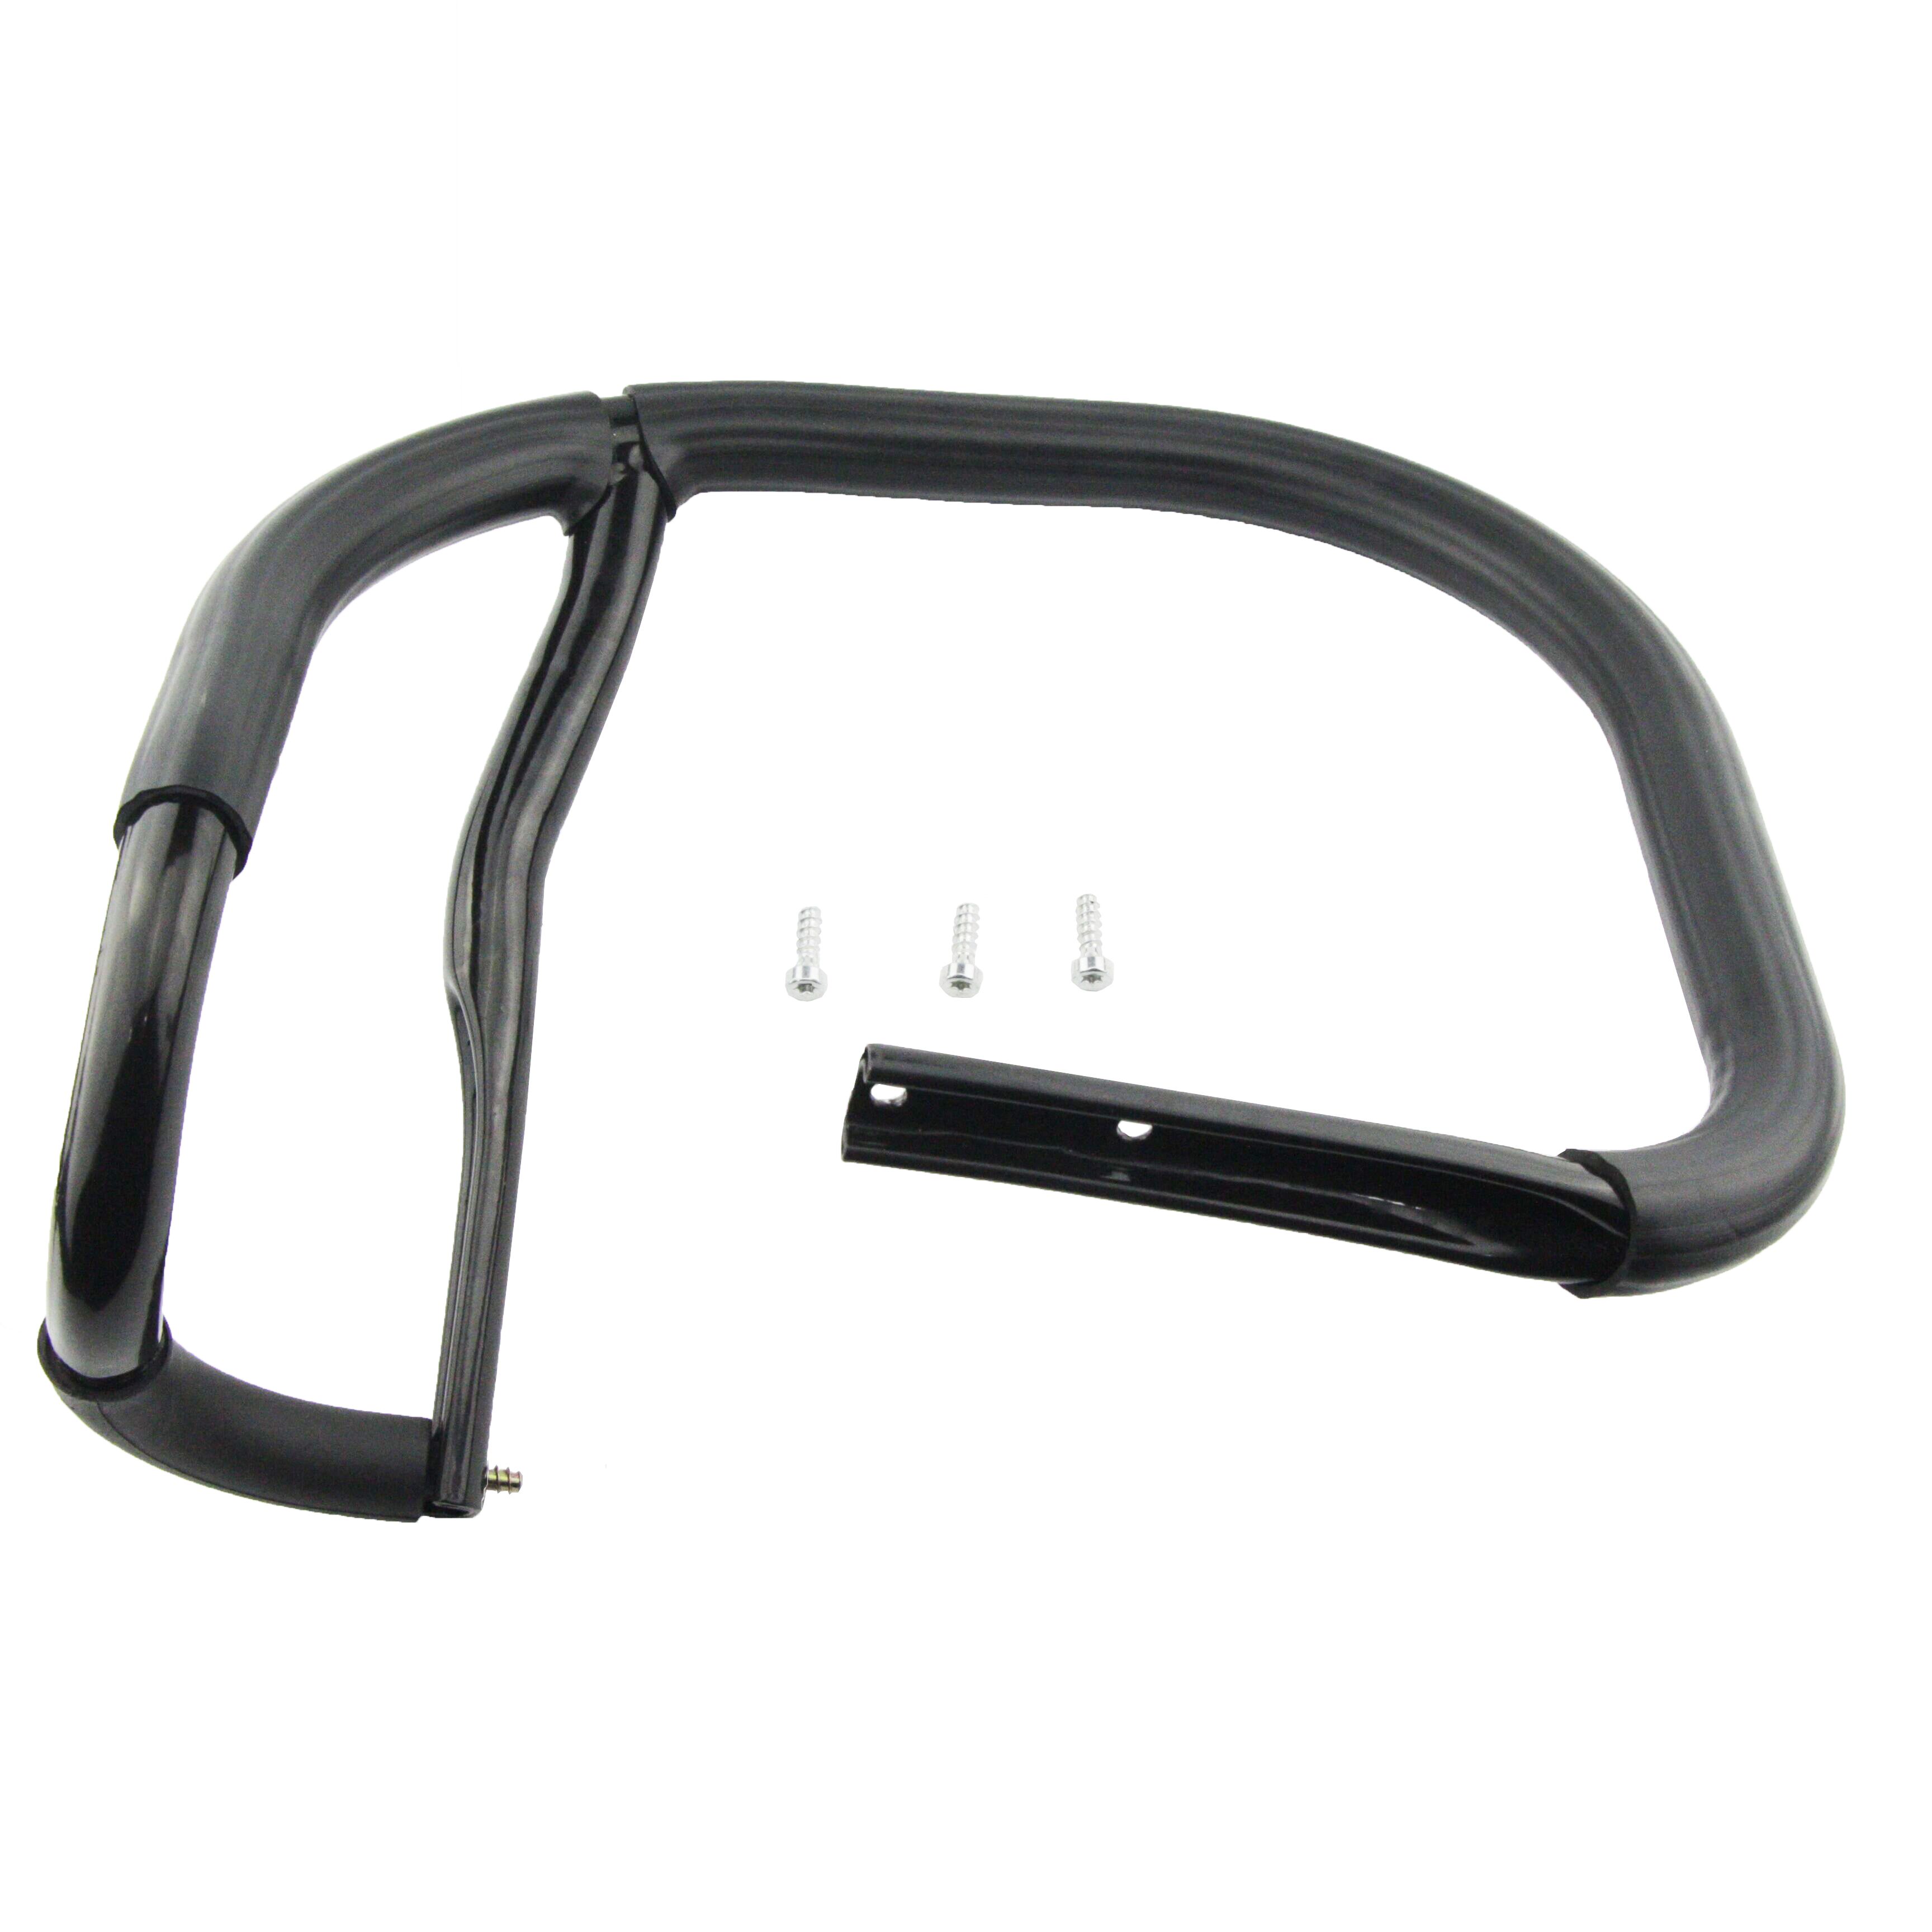 Top Handle Bar Guidon Fit For Stihl MS660 066 MS640 064 tronçonneuse 11227901750 